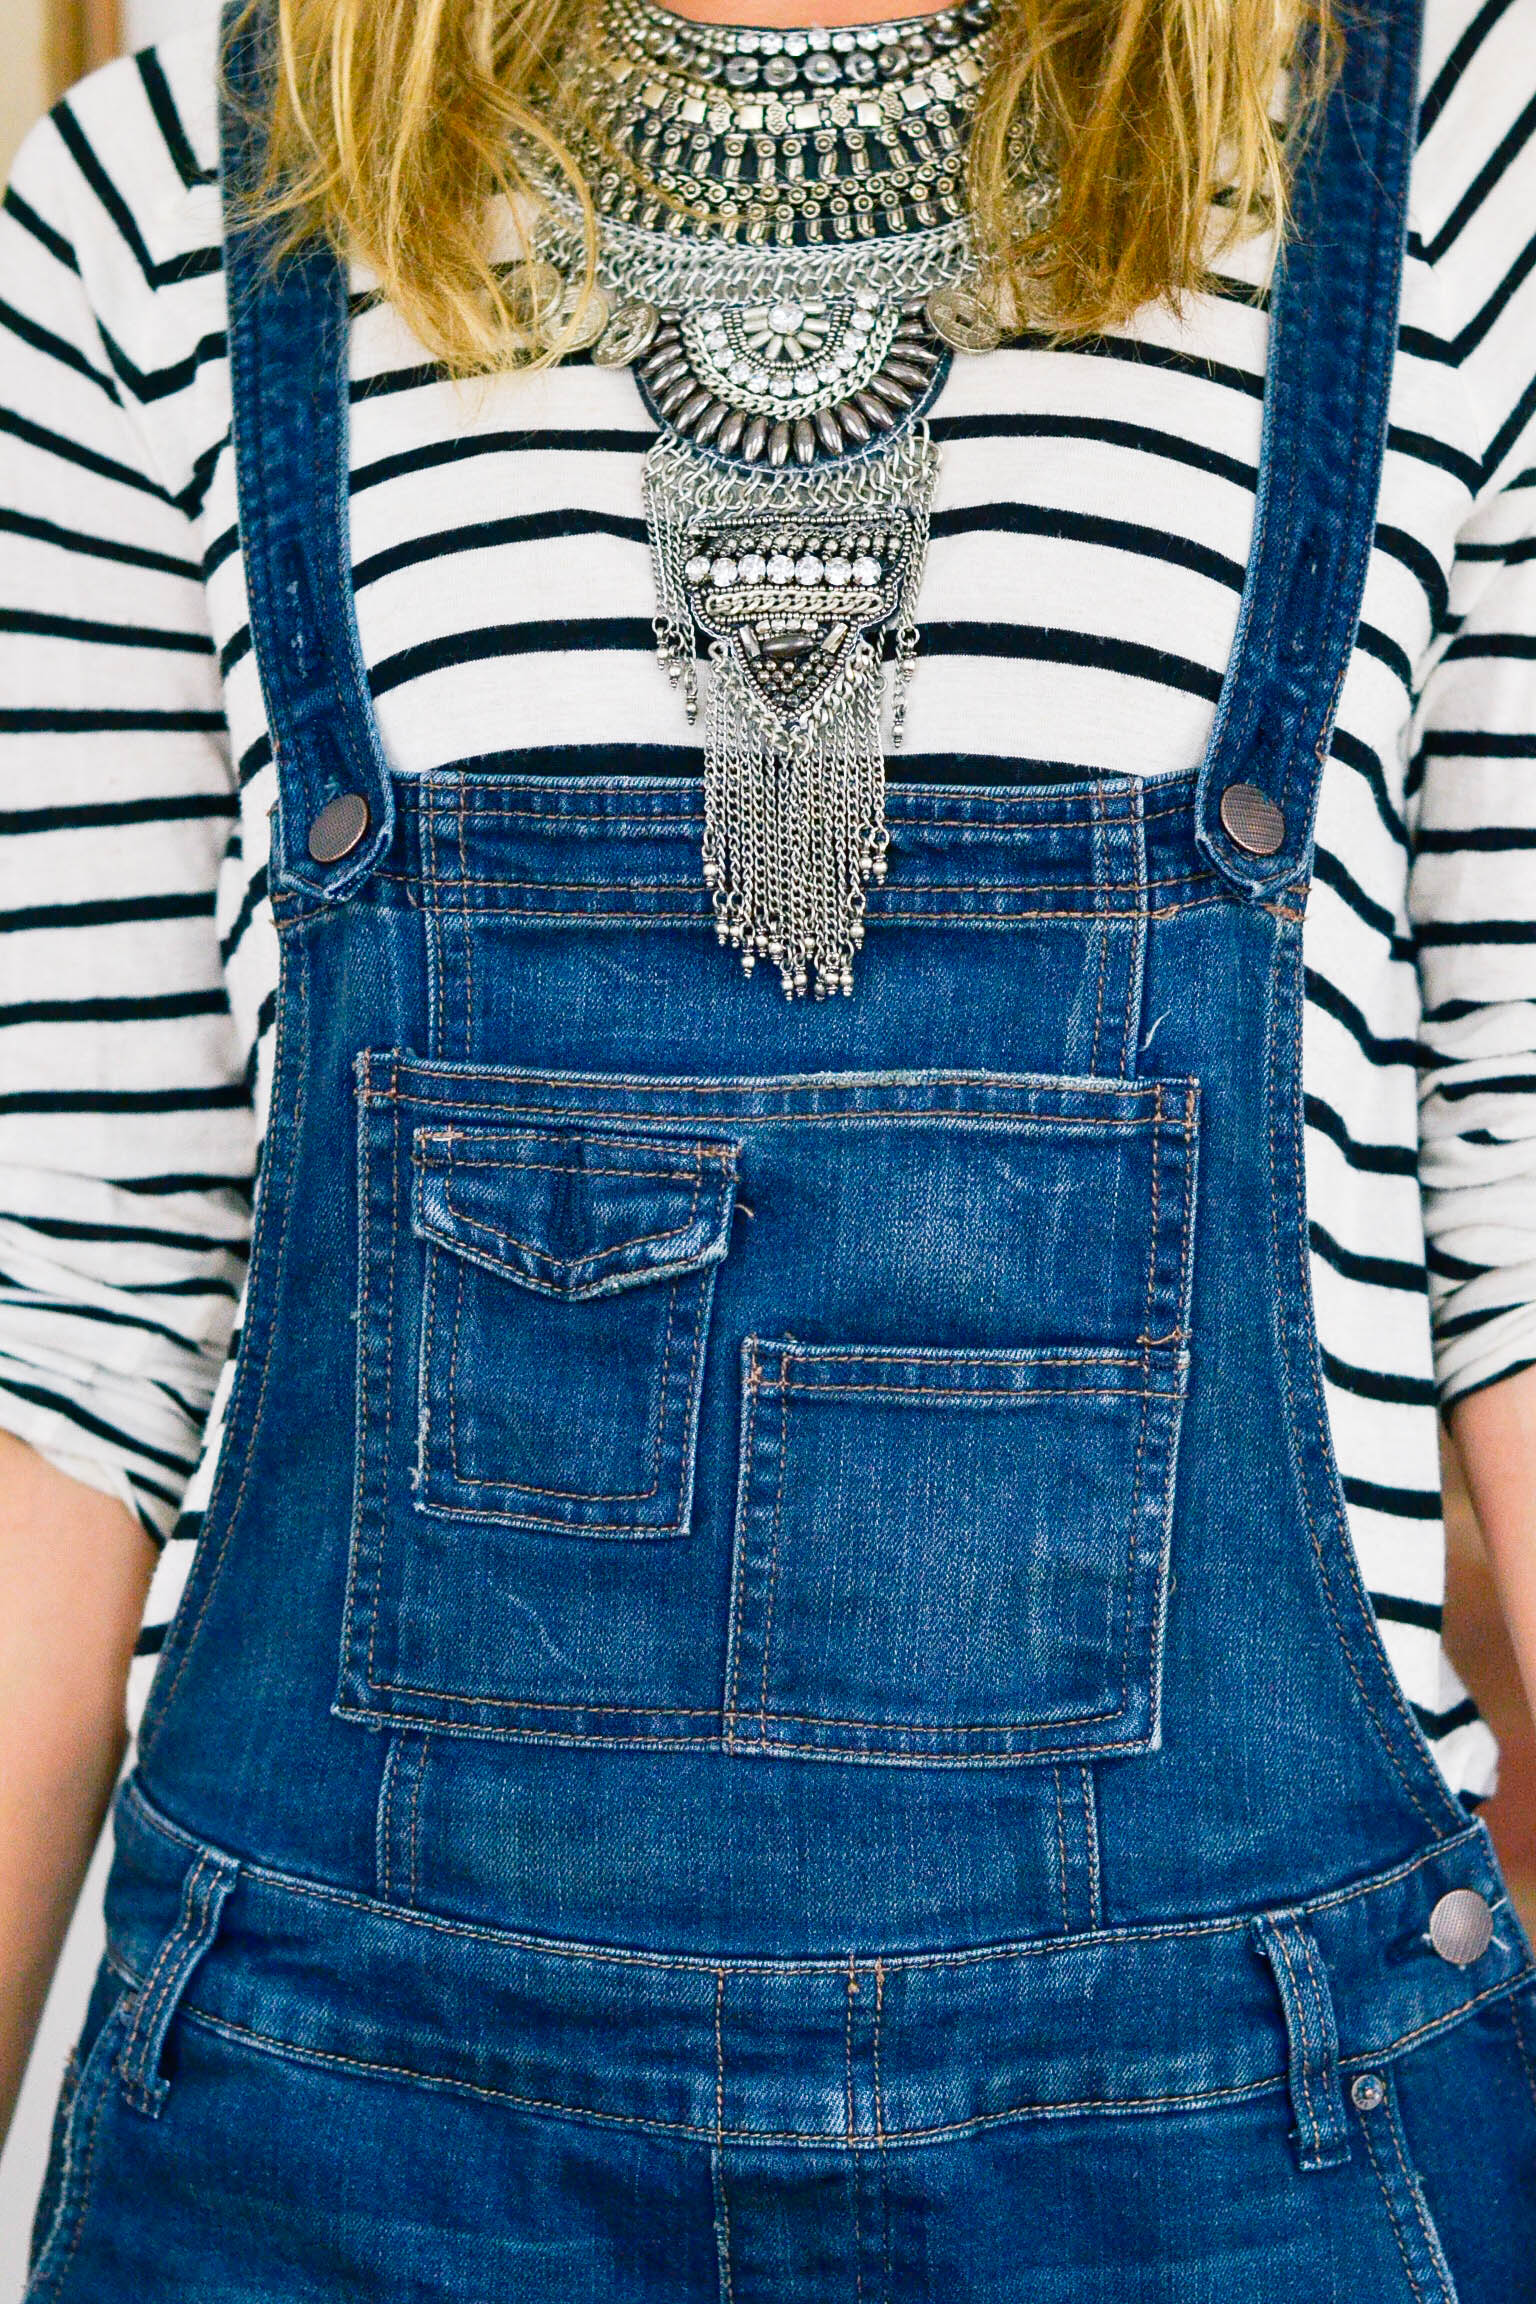 What Tops to Wear with Overalls